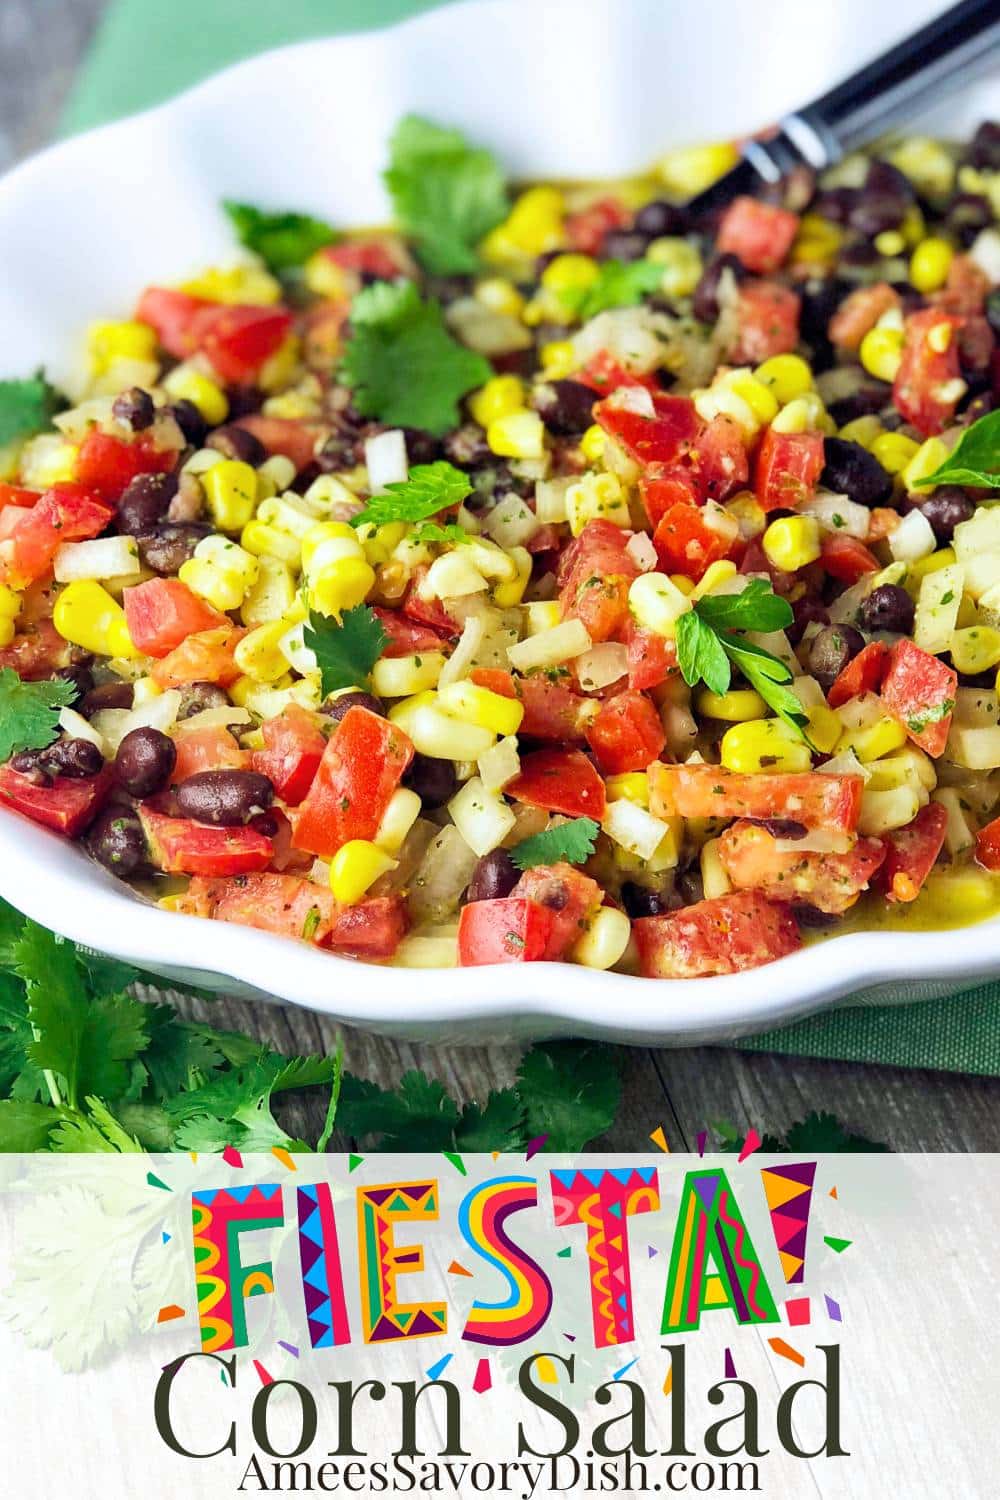 This easy Fiesta Salad features a refreshing medley of corn, black bean, and fresh veggies tossed in an irresistible Mojo-inspired sweet honey lime dressing. via @Ameessavorydish